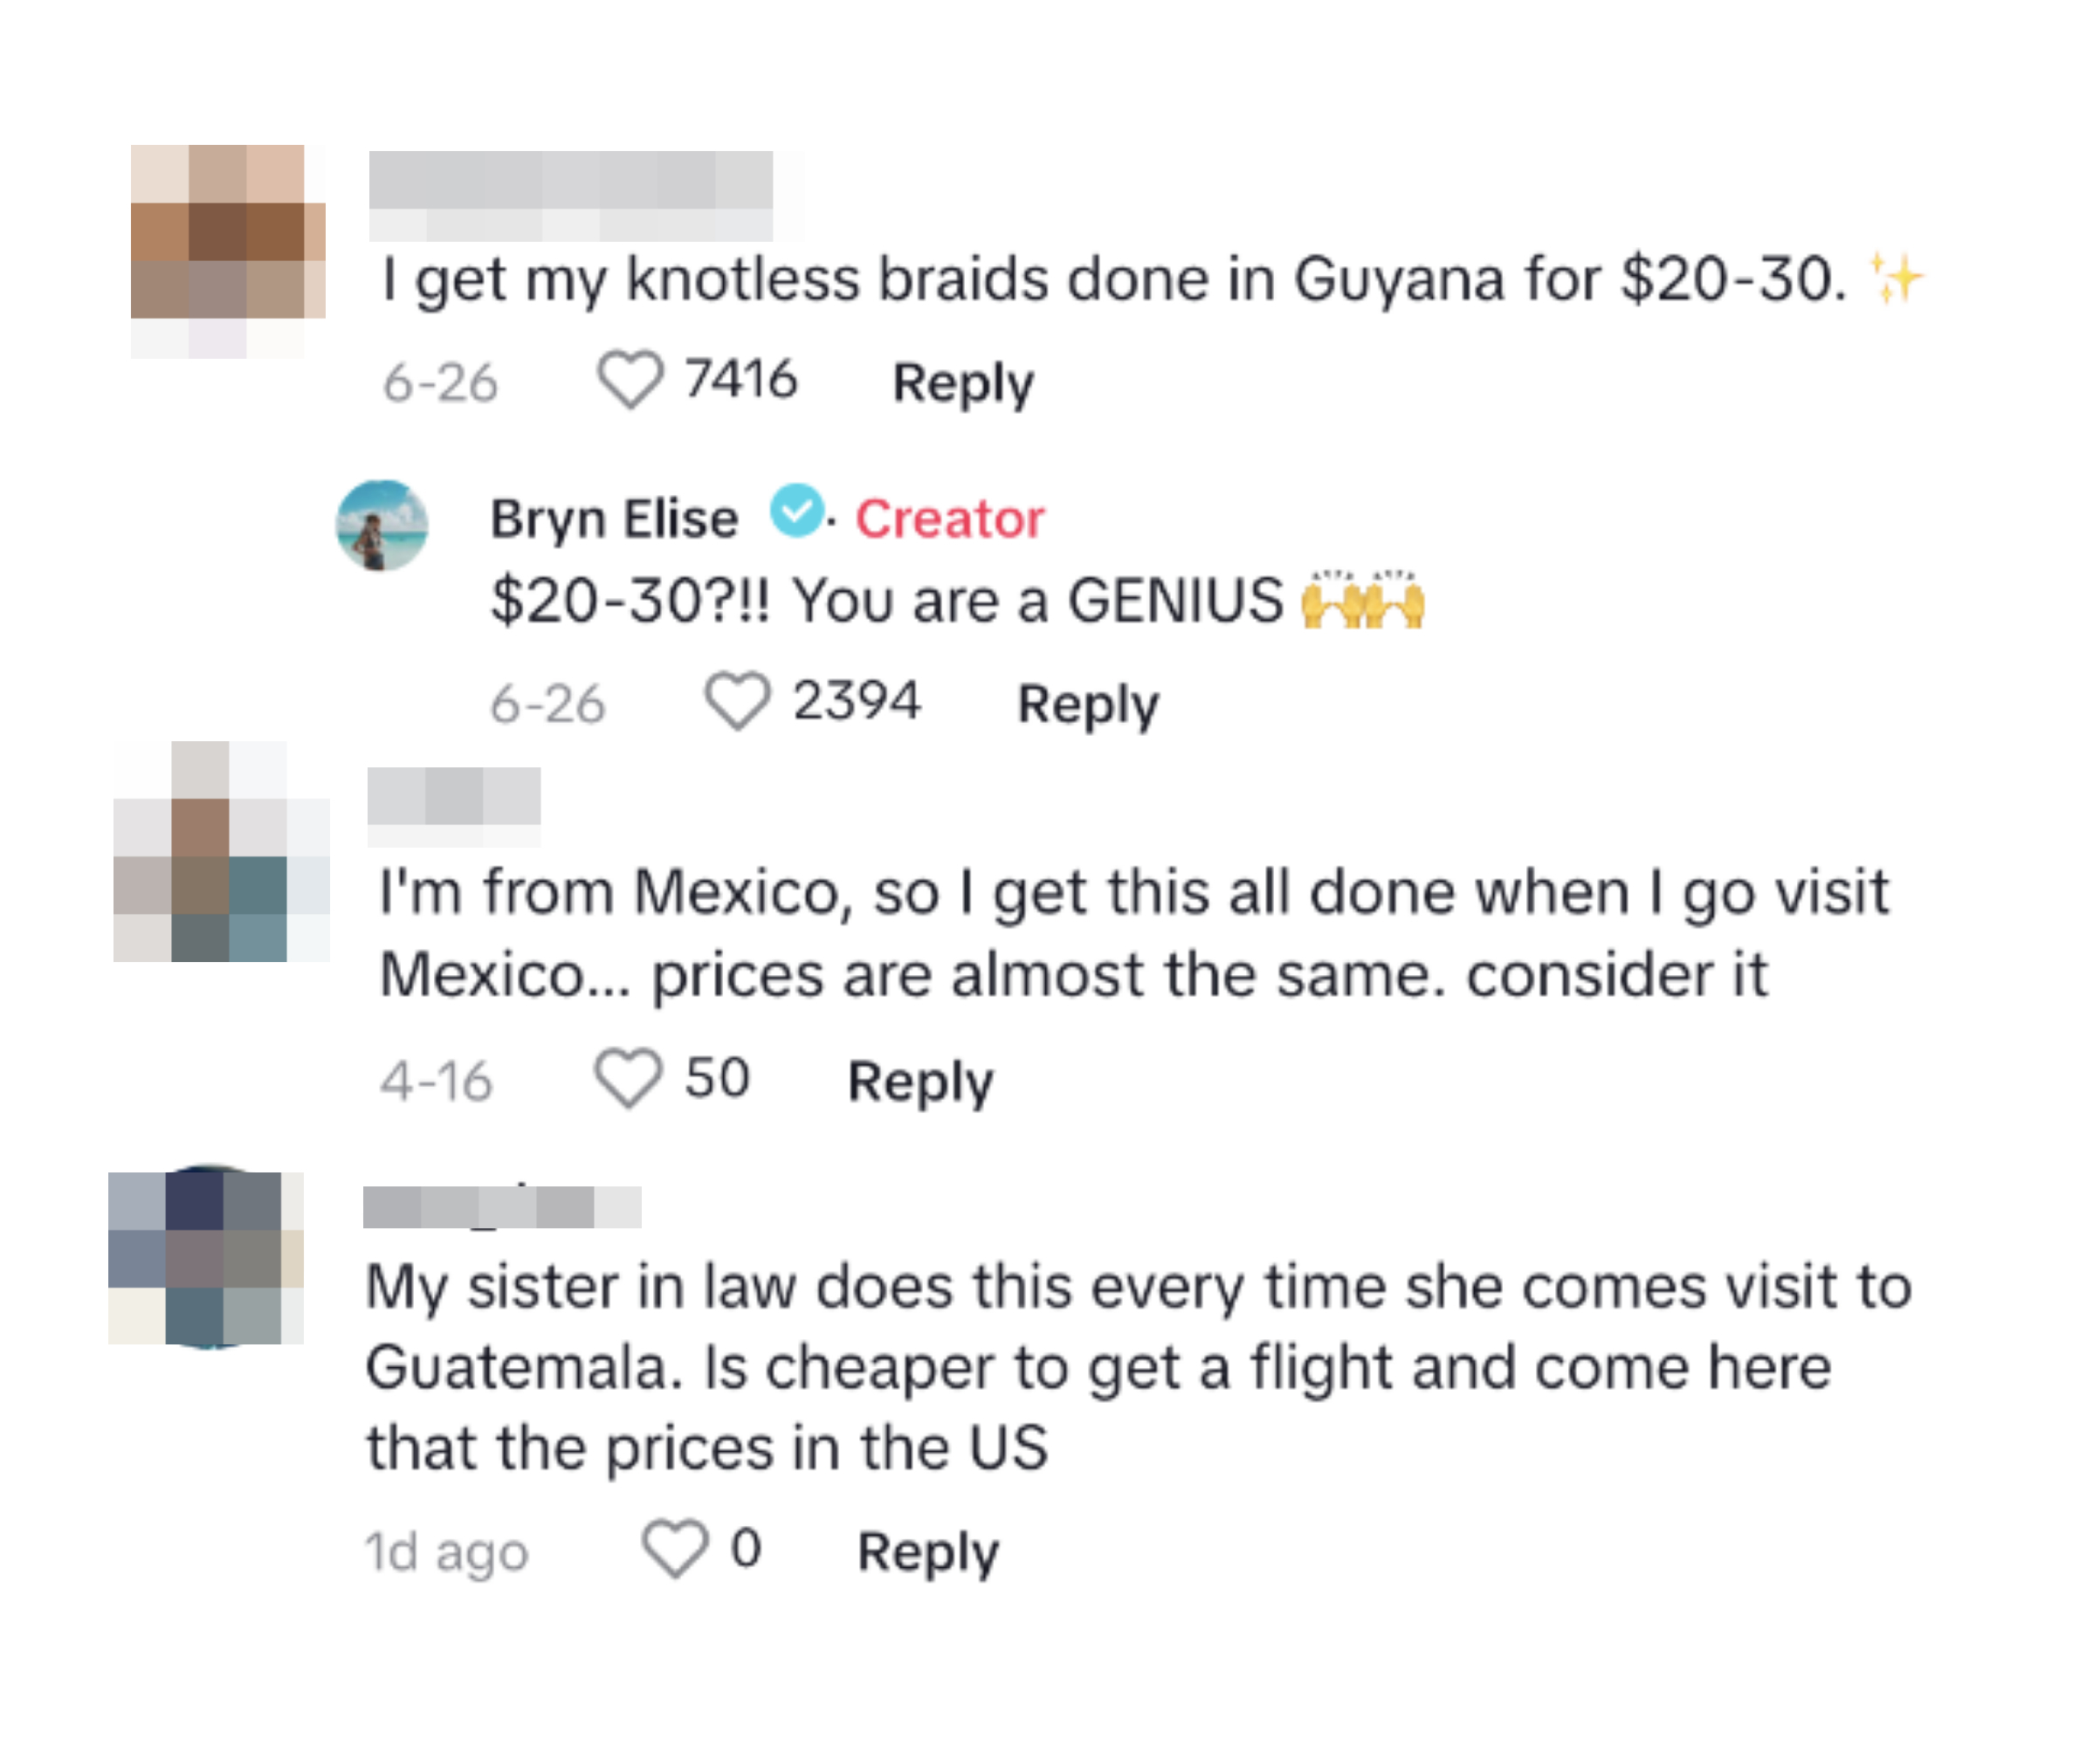 People commenting other places to get services done, like Guyana, Mexico, and Guatemala